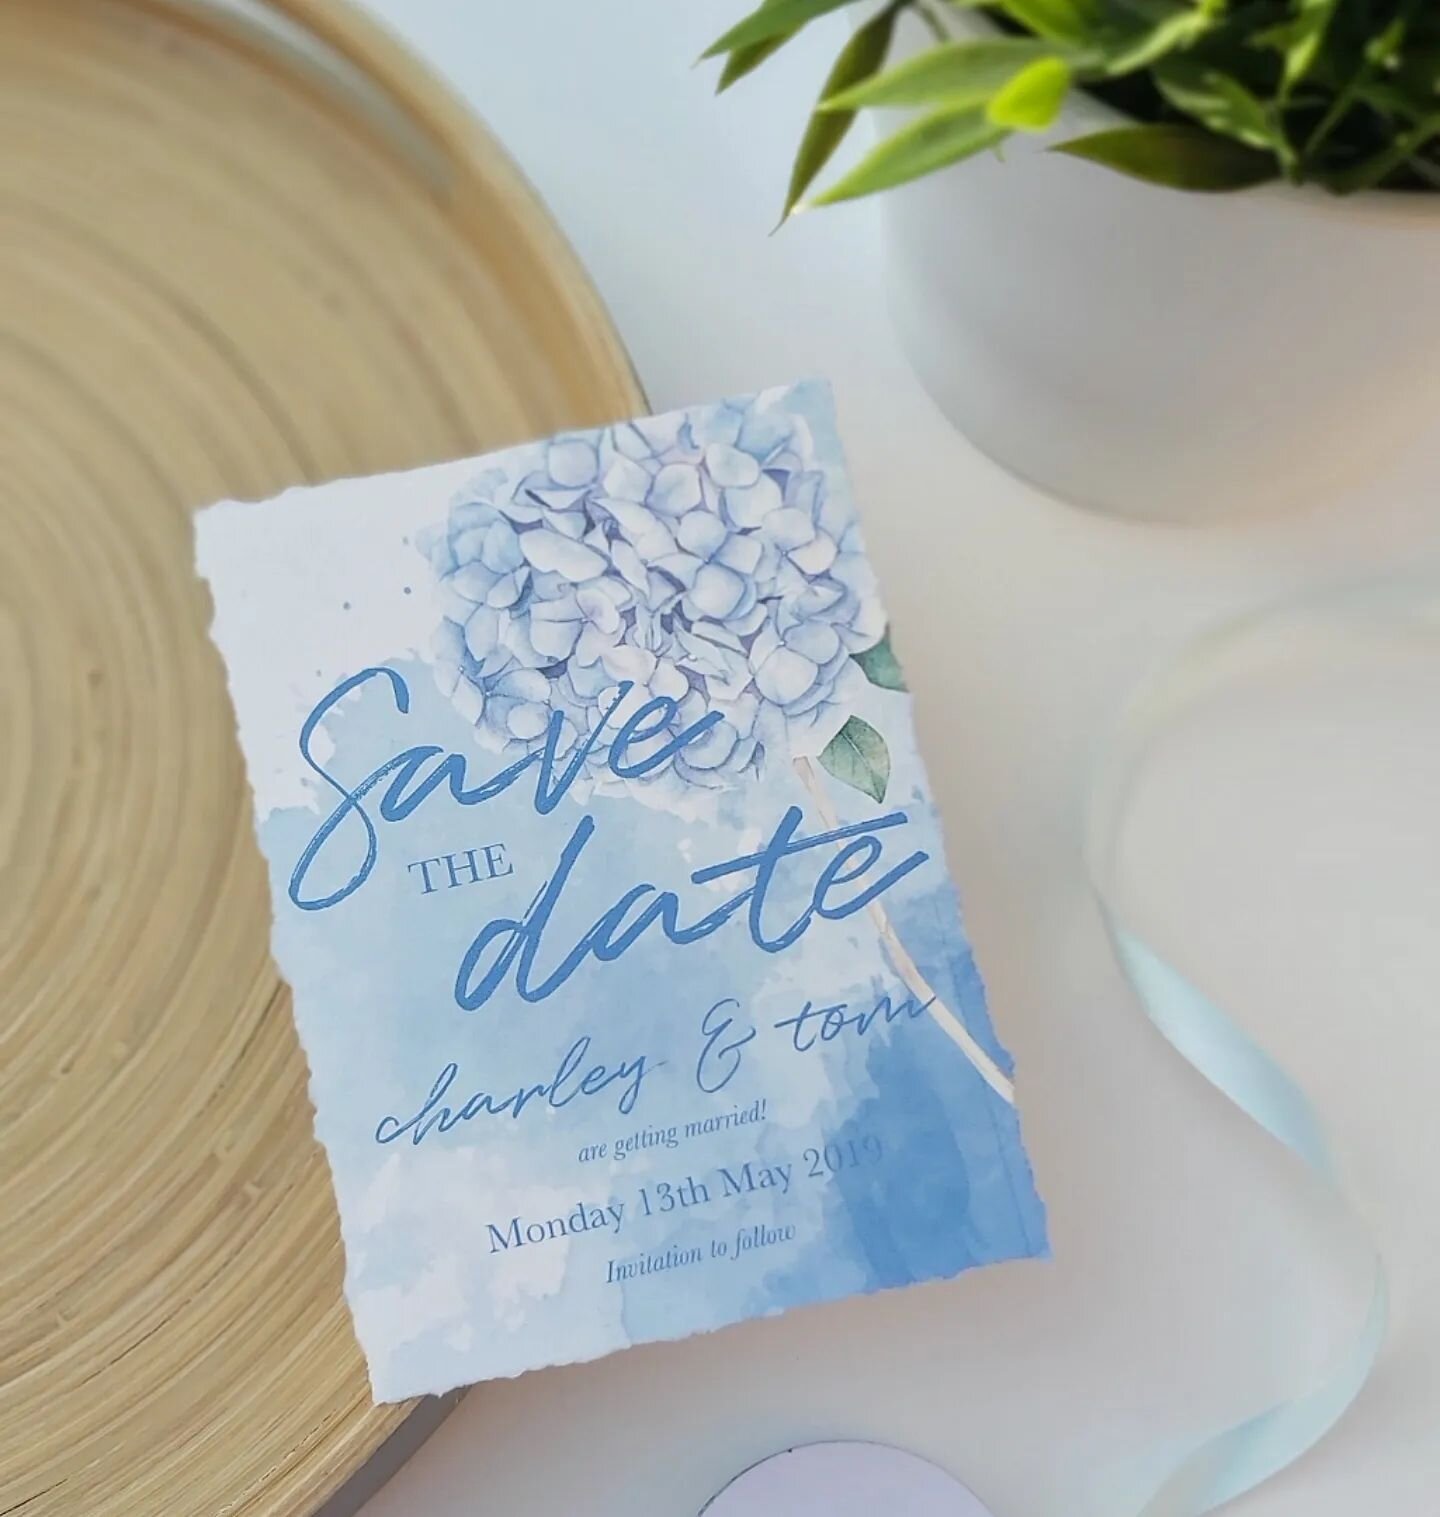 🌿💙
This time of year is when most engaged couples start to enquire about their wedding stationery so get ahead of the game with this handy tip...
.
𝐘𝐨𝐮𝐫 𝐬𝐭𝐚𝐭𝐢𝐨𝐧𝐞𝐫𝐲 𝐧𝐮𝐦𝐛𝐞𝐫𝐬 𝐚𝐫𝐞 *𝐧𝐨𝐭* 𝐭𝐡𝐞 𝐬𝐚𝐦𝐞 𝐚𝐬 𝐲𝐨𝐮𝐫 𝐭𝐨𝐭𝐚?